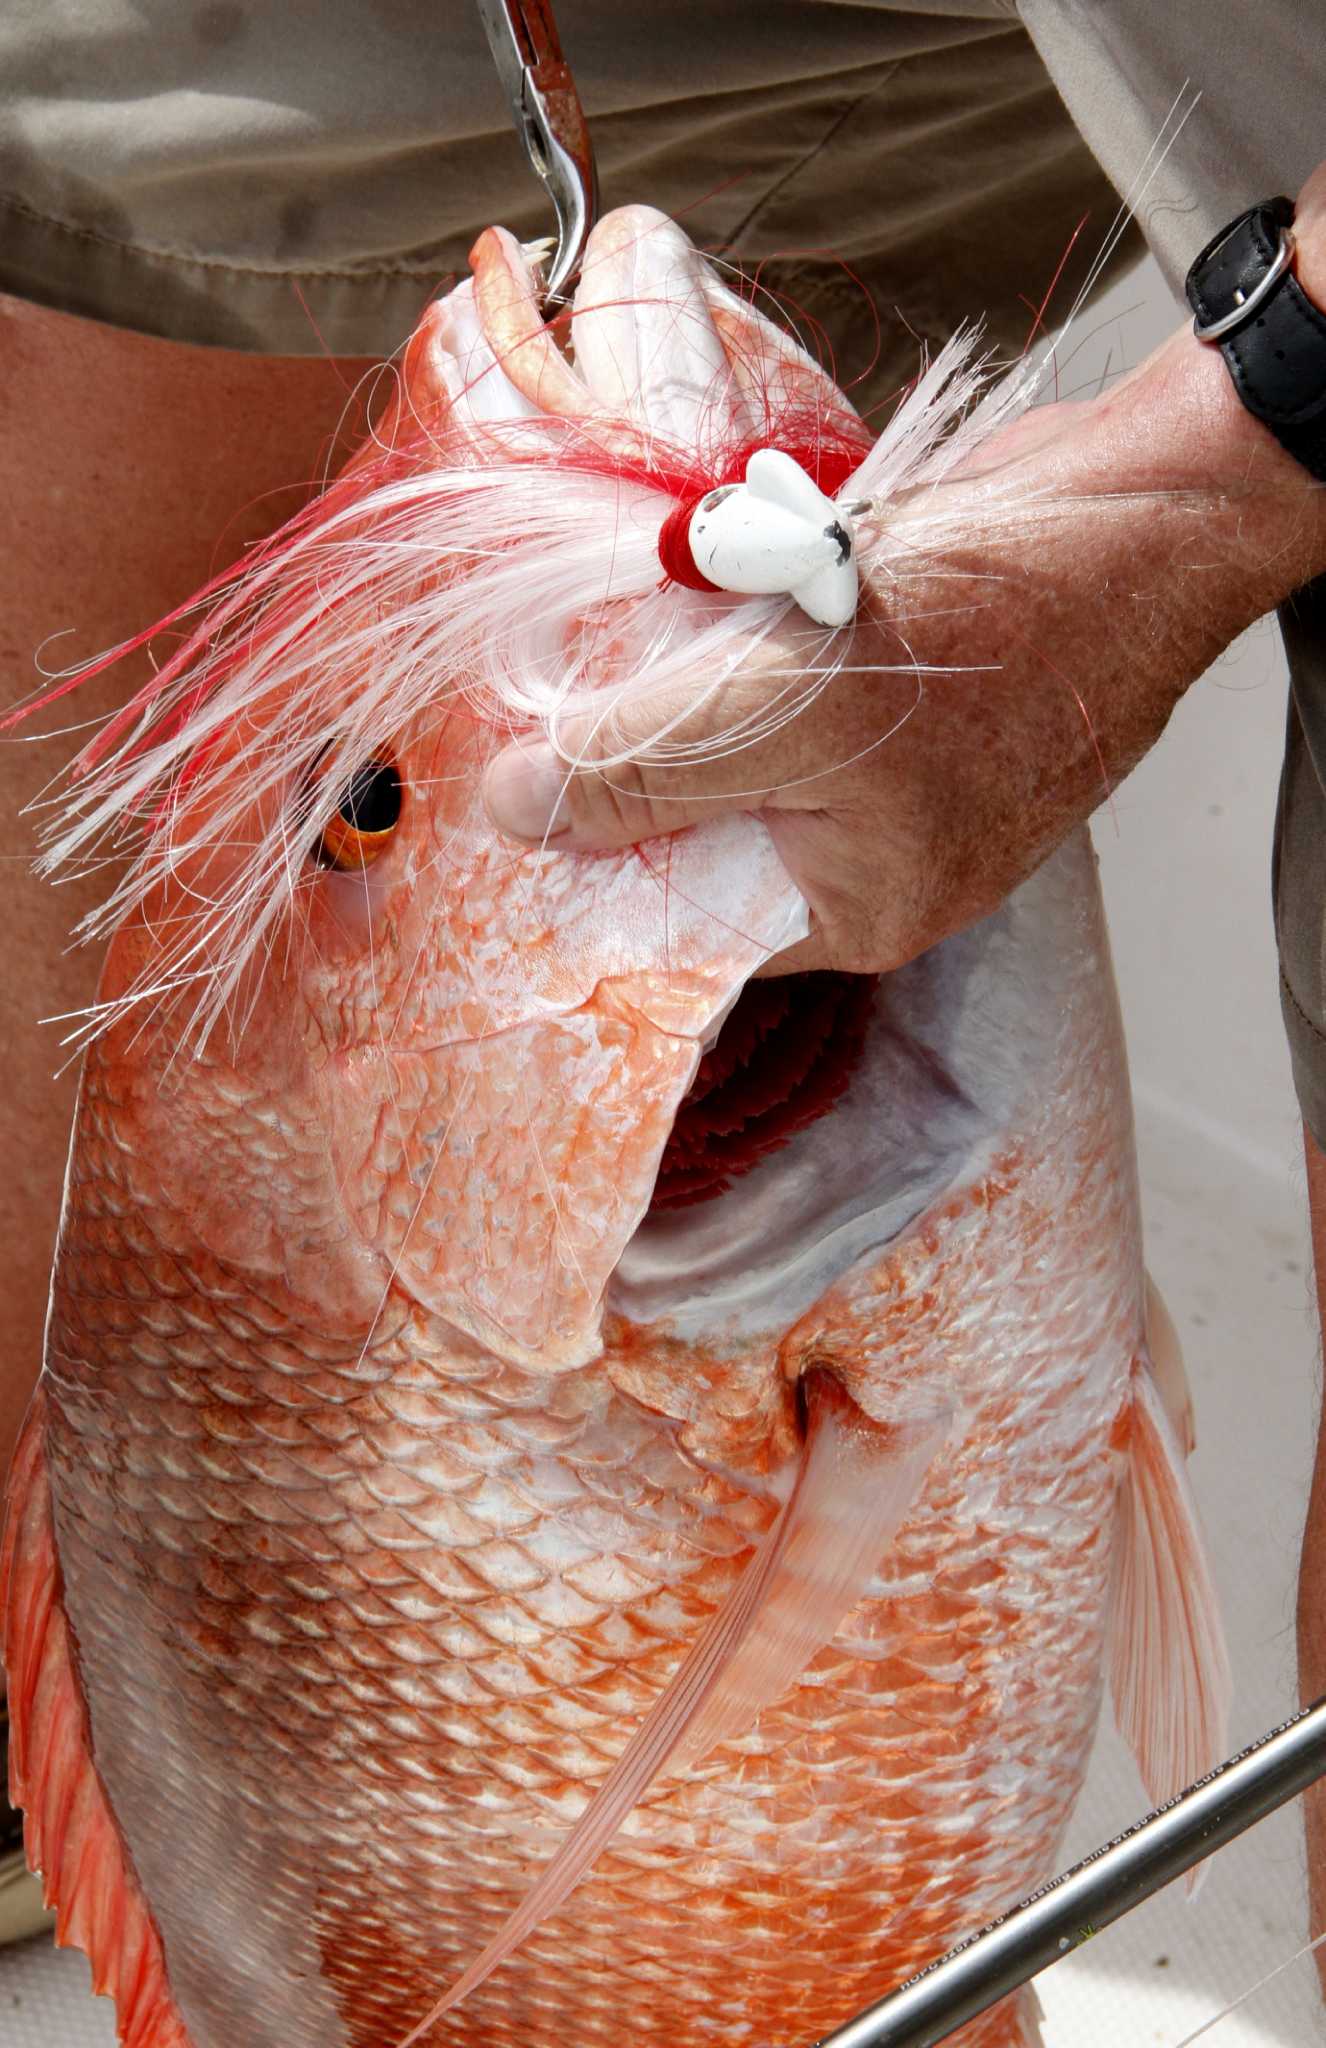 Texas' red snapper season will be shortest ever